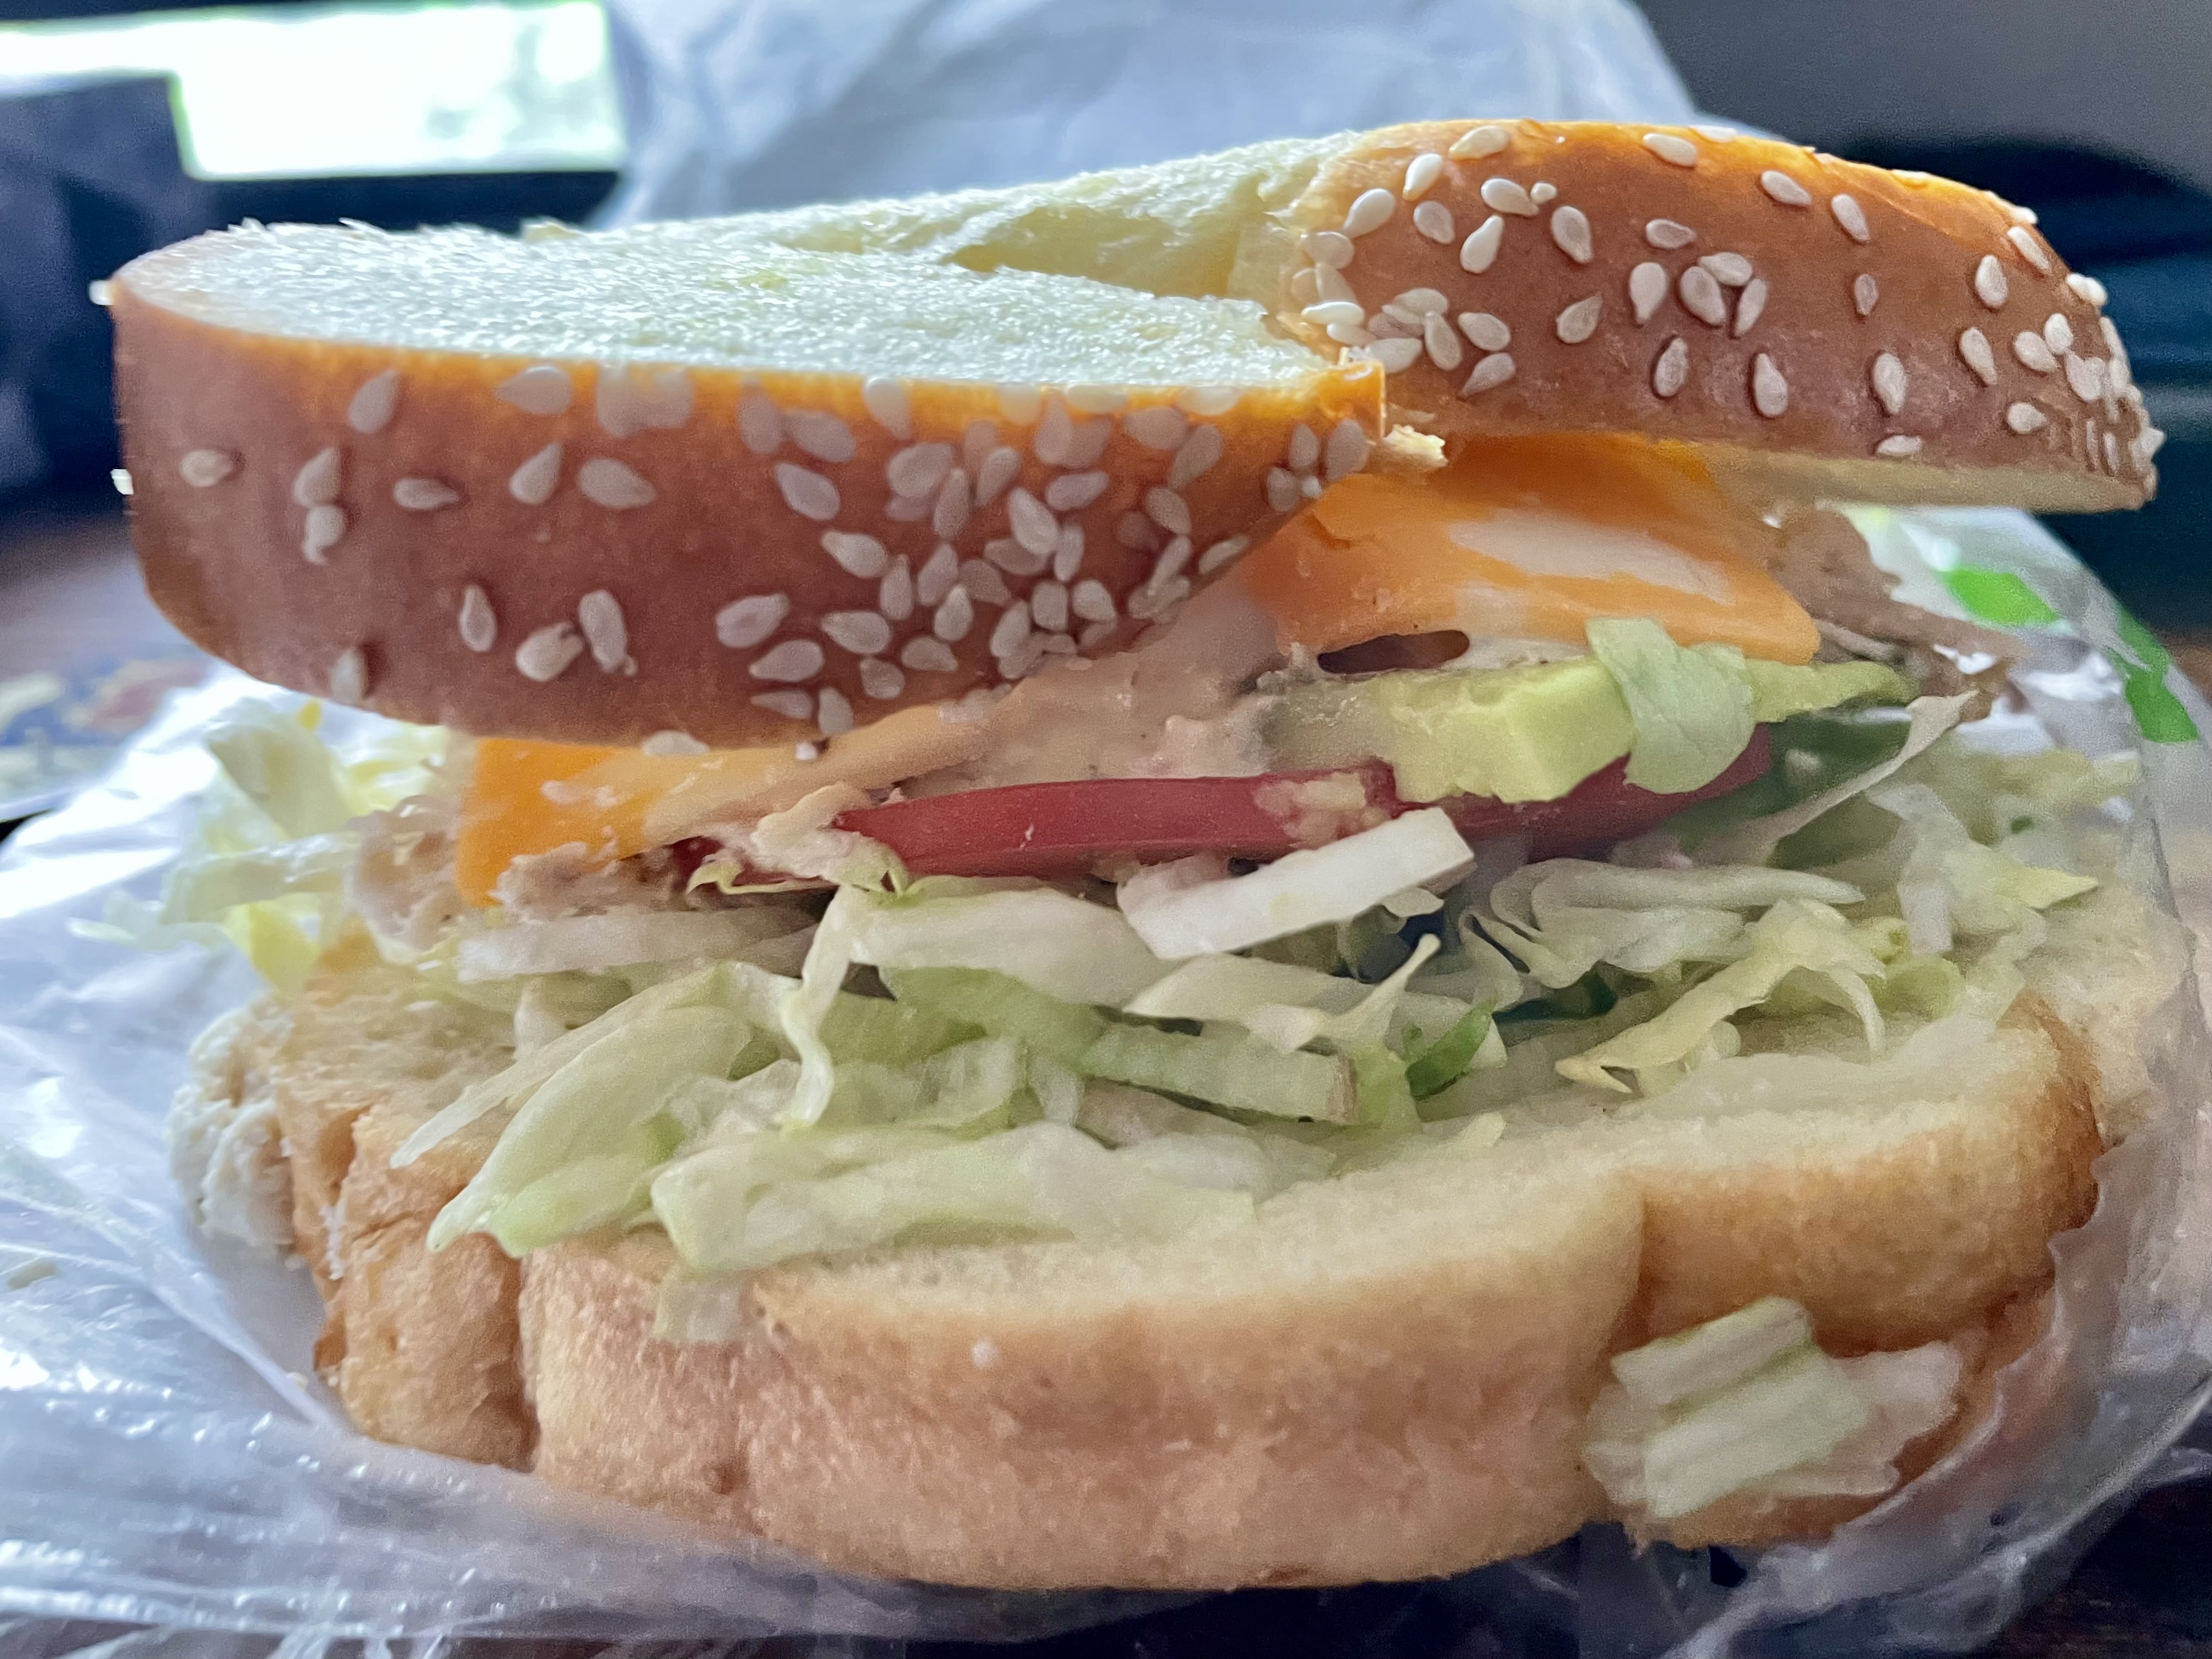 People praise the barbecue chicken, bacon and avocado sandwich not just its main ingredients, but also the deli's signature sauce